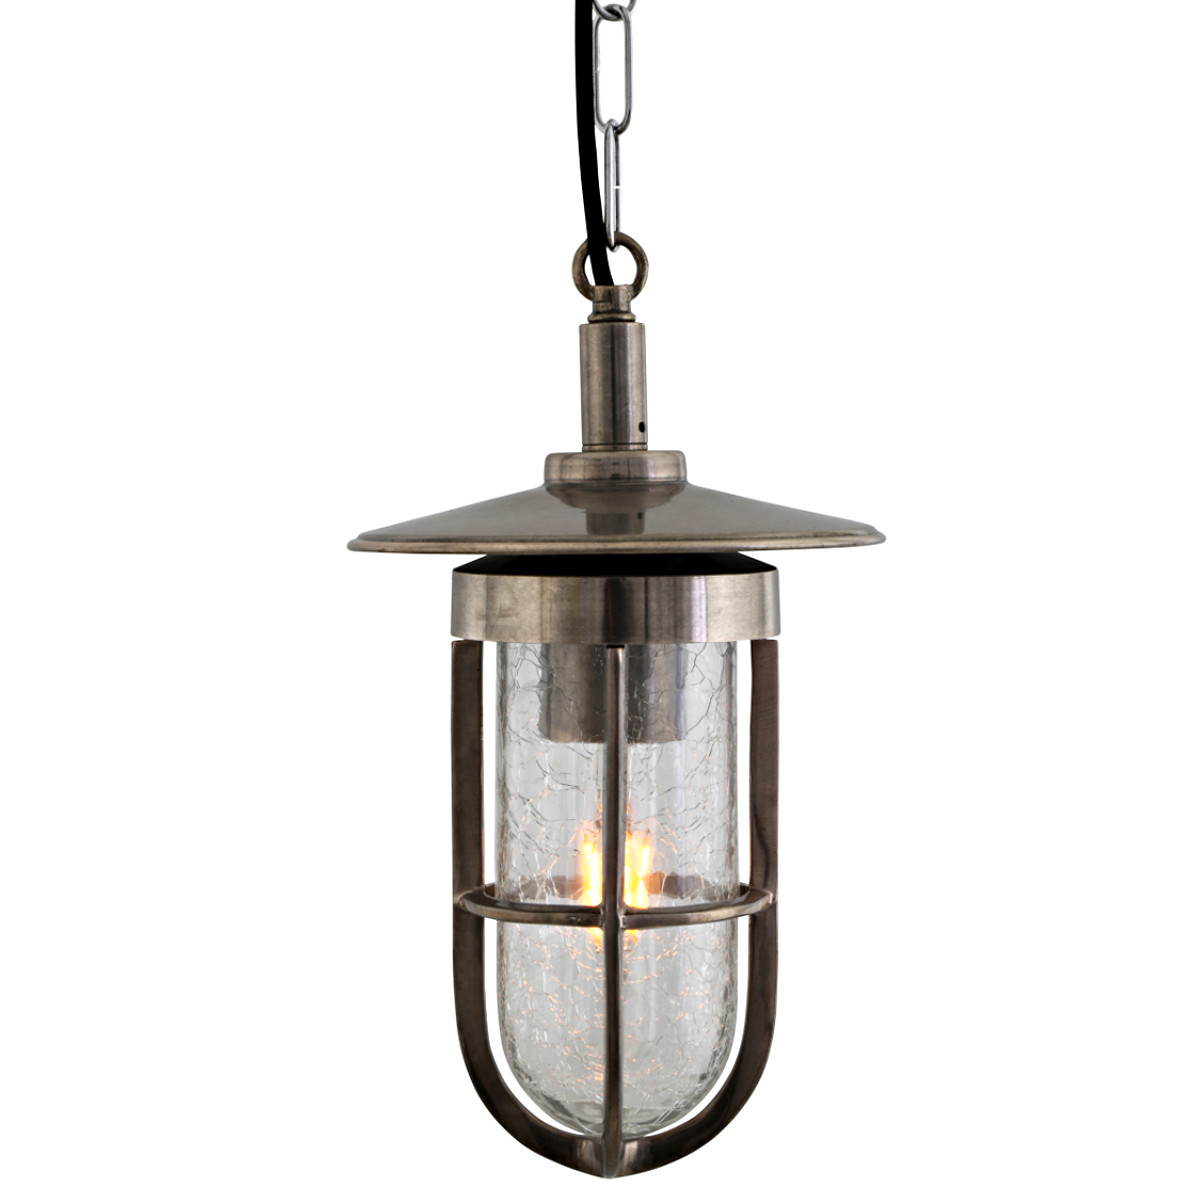 Brass Factory Pendant Lamp With Small Shade Crook